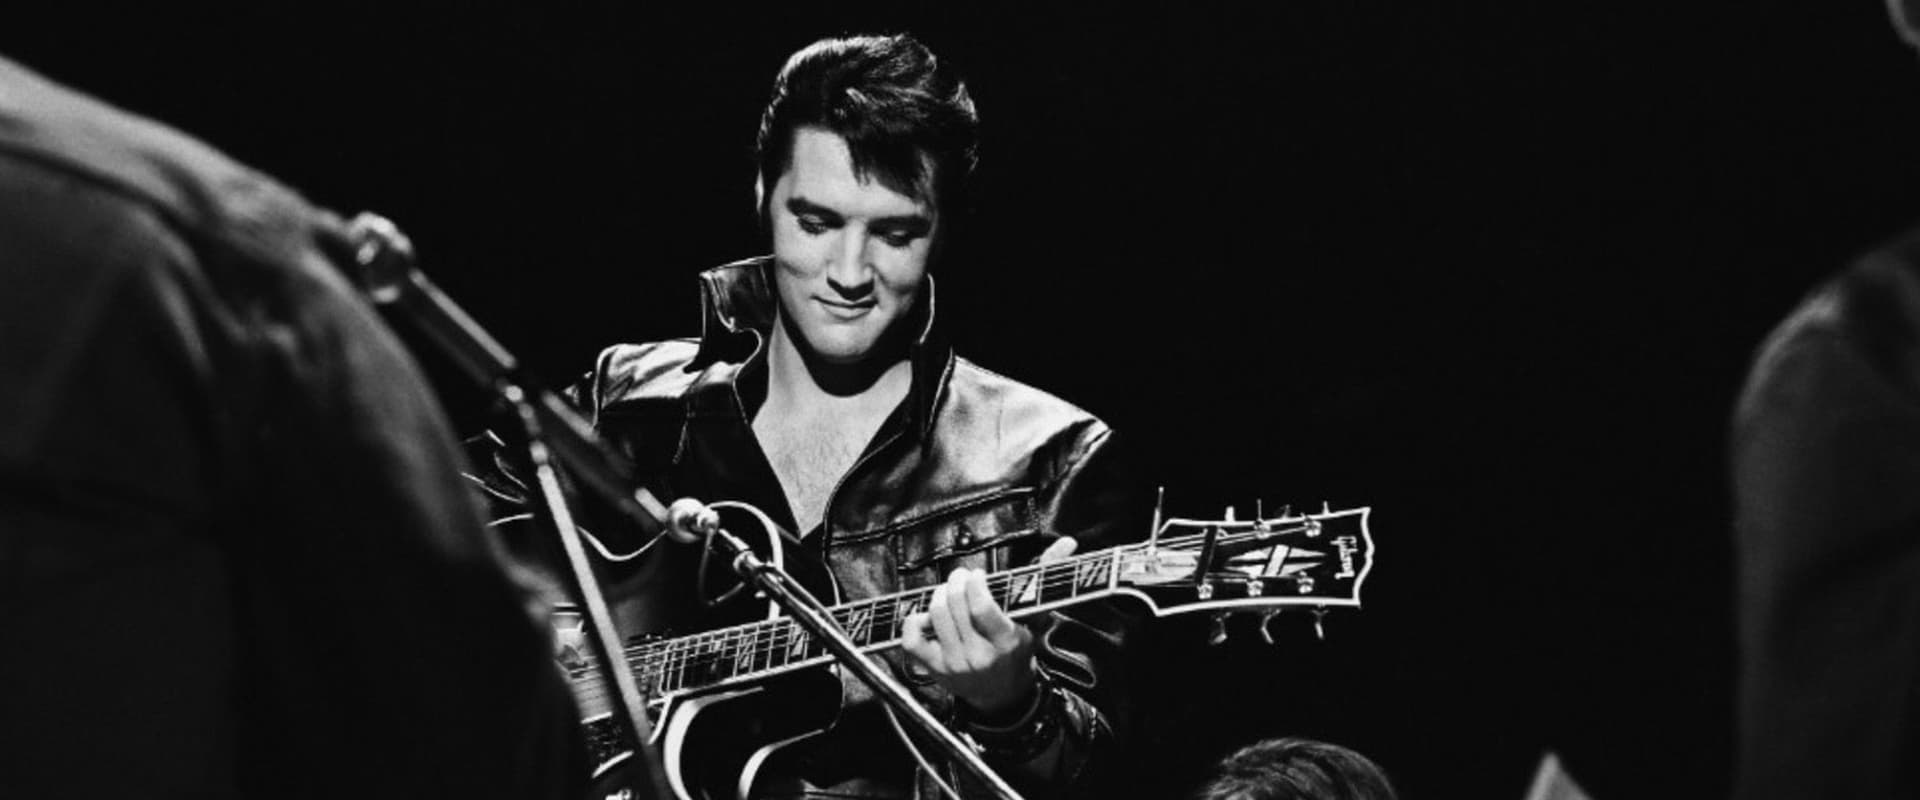 Elvis: The '68 Comeback Special